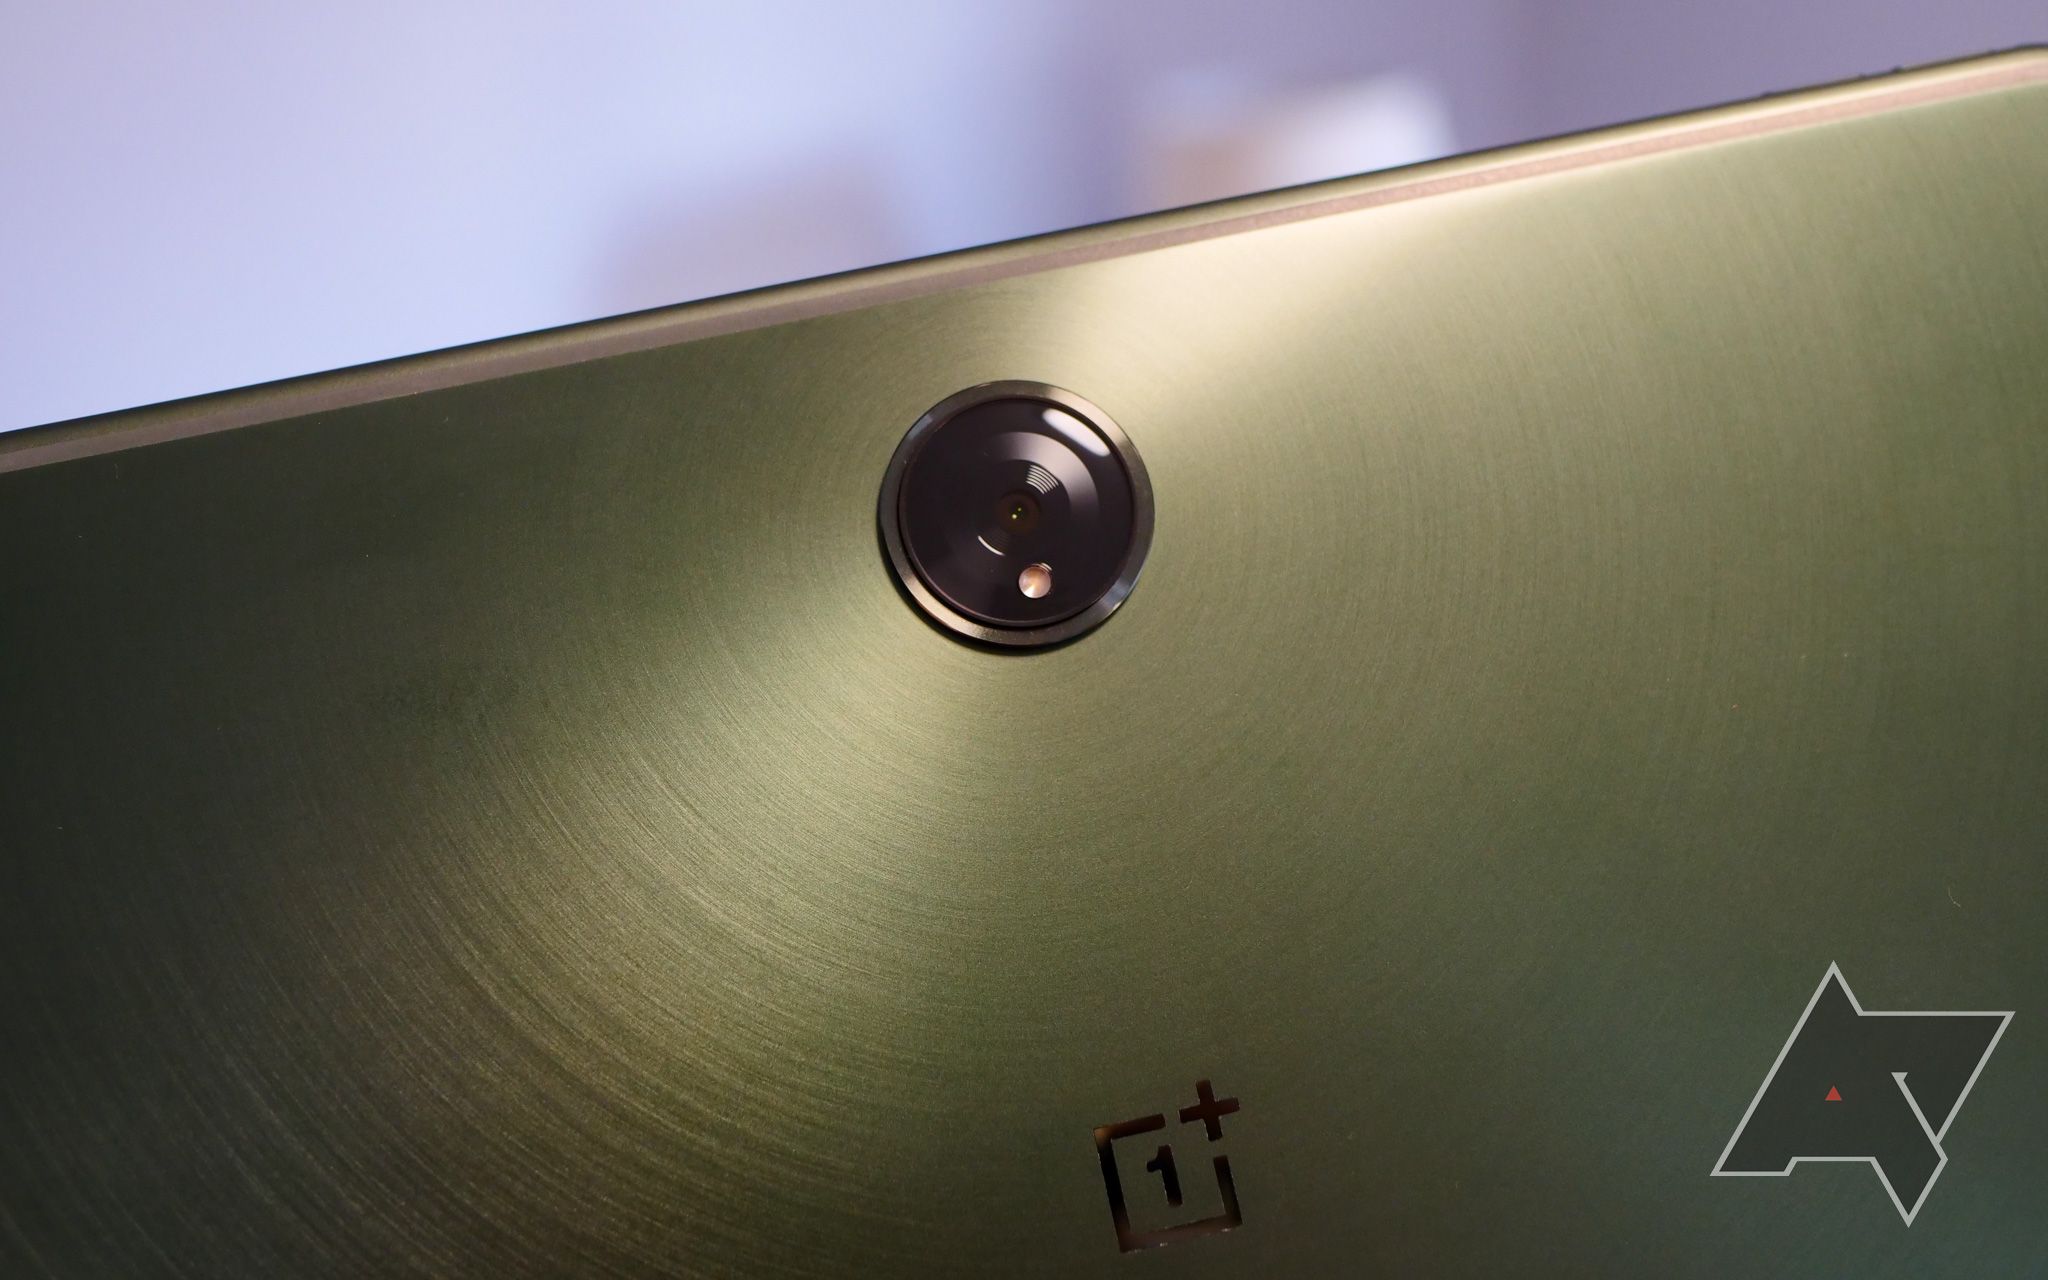 OnePlus is officially getting into the tablet game with the